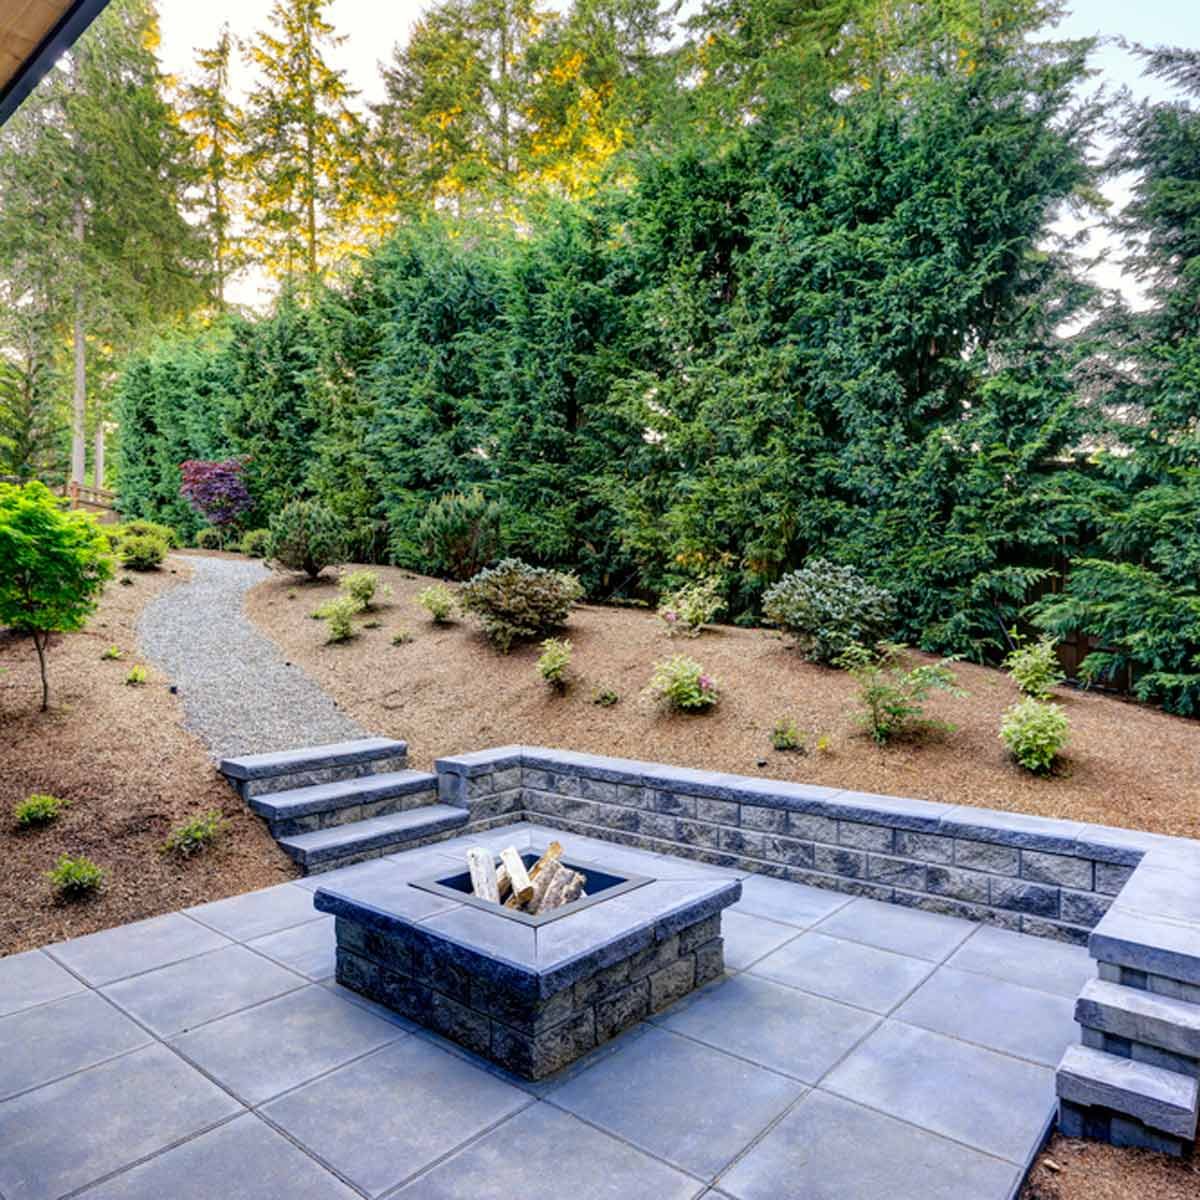 10 Things to Consider When Building a Backyard Fire Pit